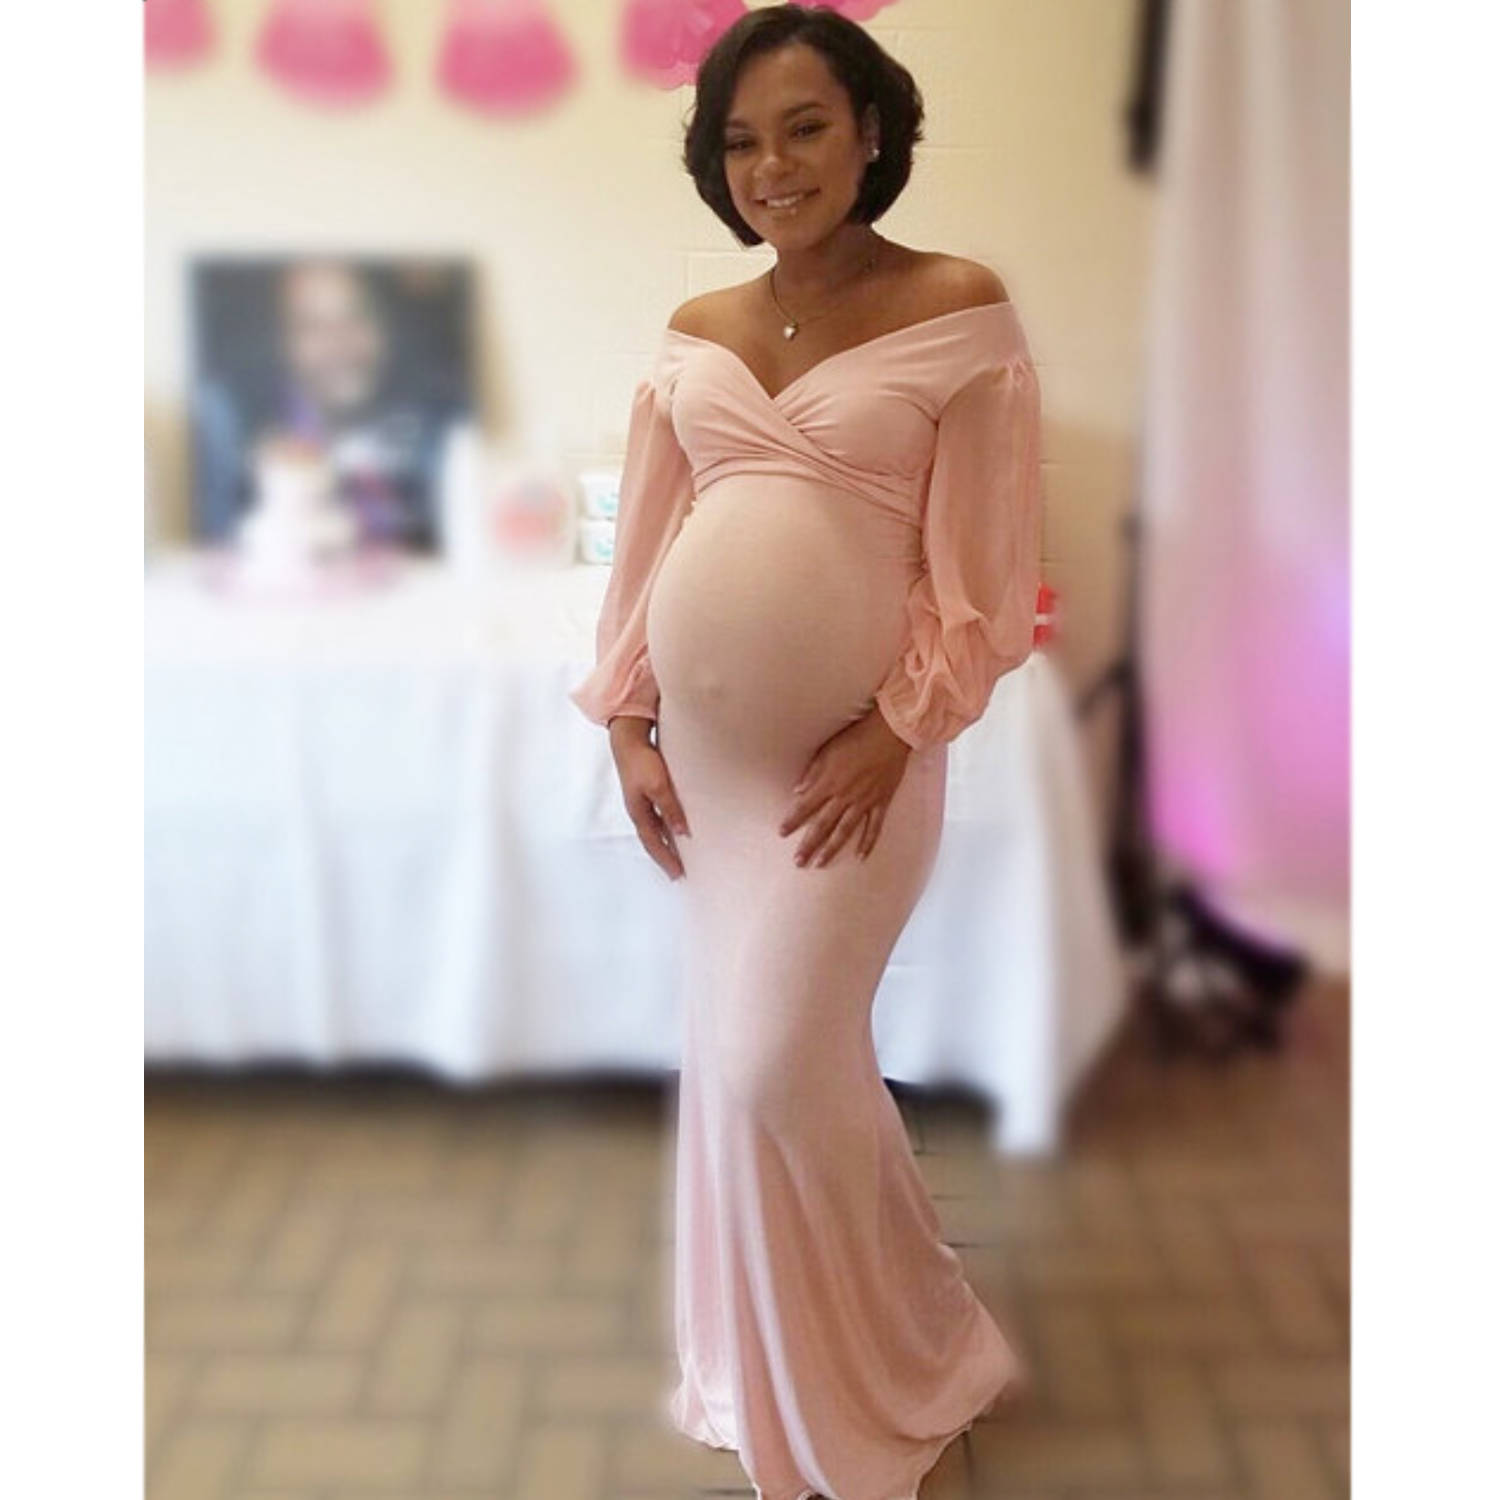 Full Size of Baby Shower:maternity Clothes H&m Showing Lsi Keywords For Baby Shower Dresses Maternity Evening Gowns Non Maternity Dresses For Baby Shower A Pea In The Pod Maternity Clothes Maternity Dresses Formal 2 Searches Left. What Should I Wear To My Baby Shower